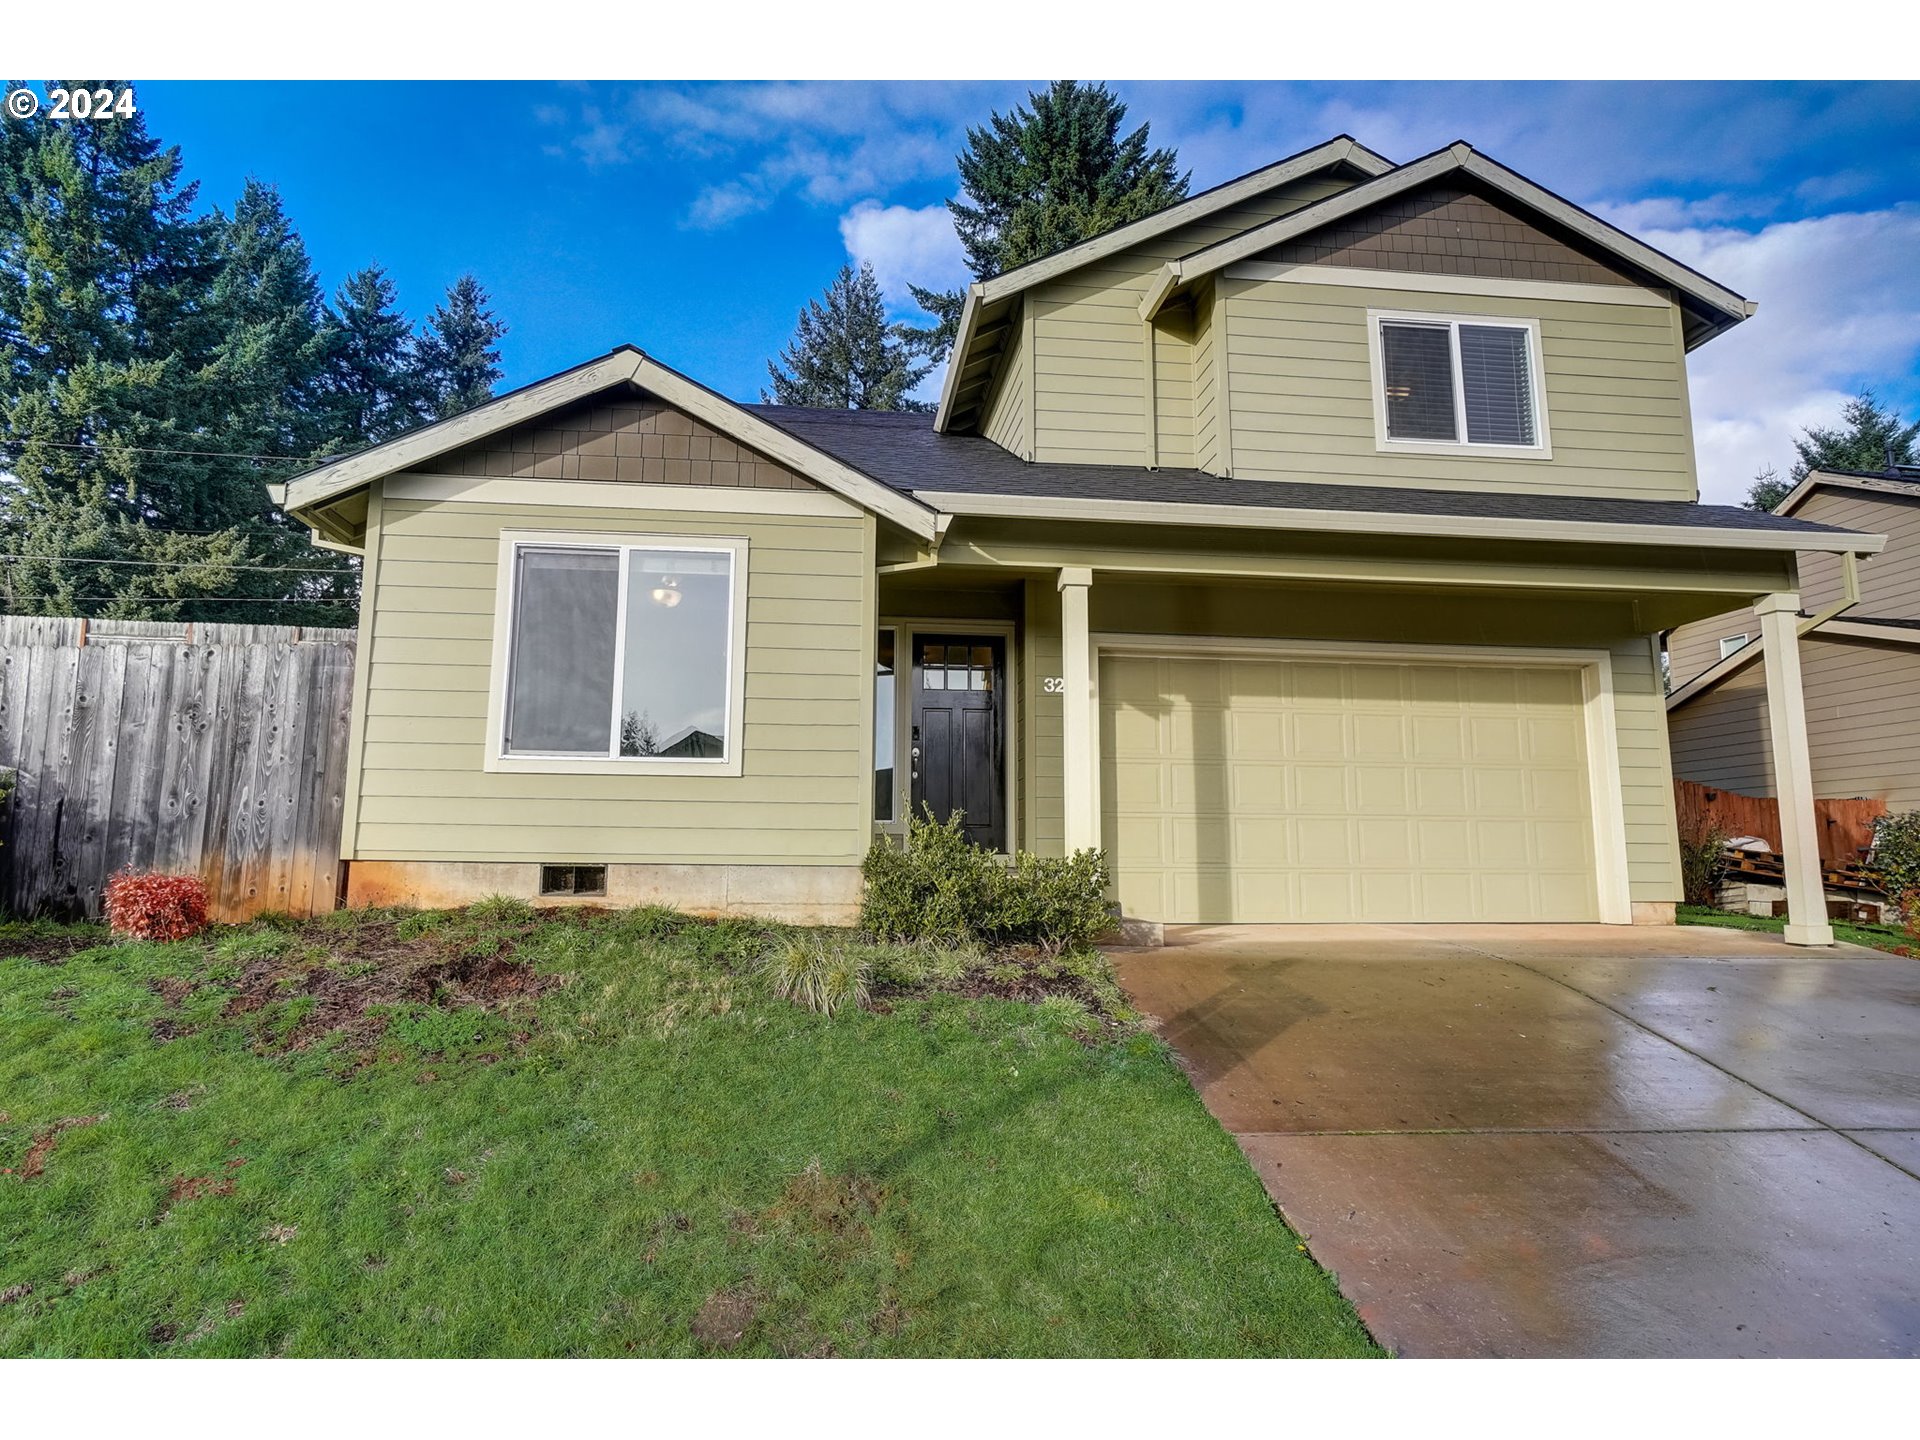 326 NW PACIFIC HILLS DR, Willamina, OR 97396